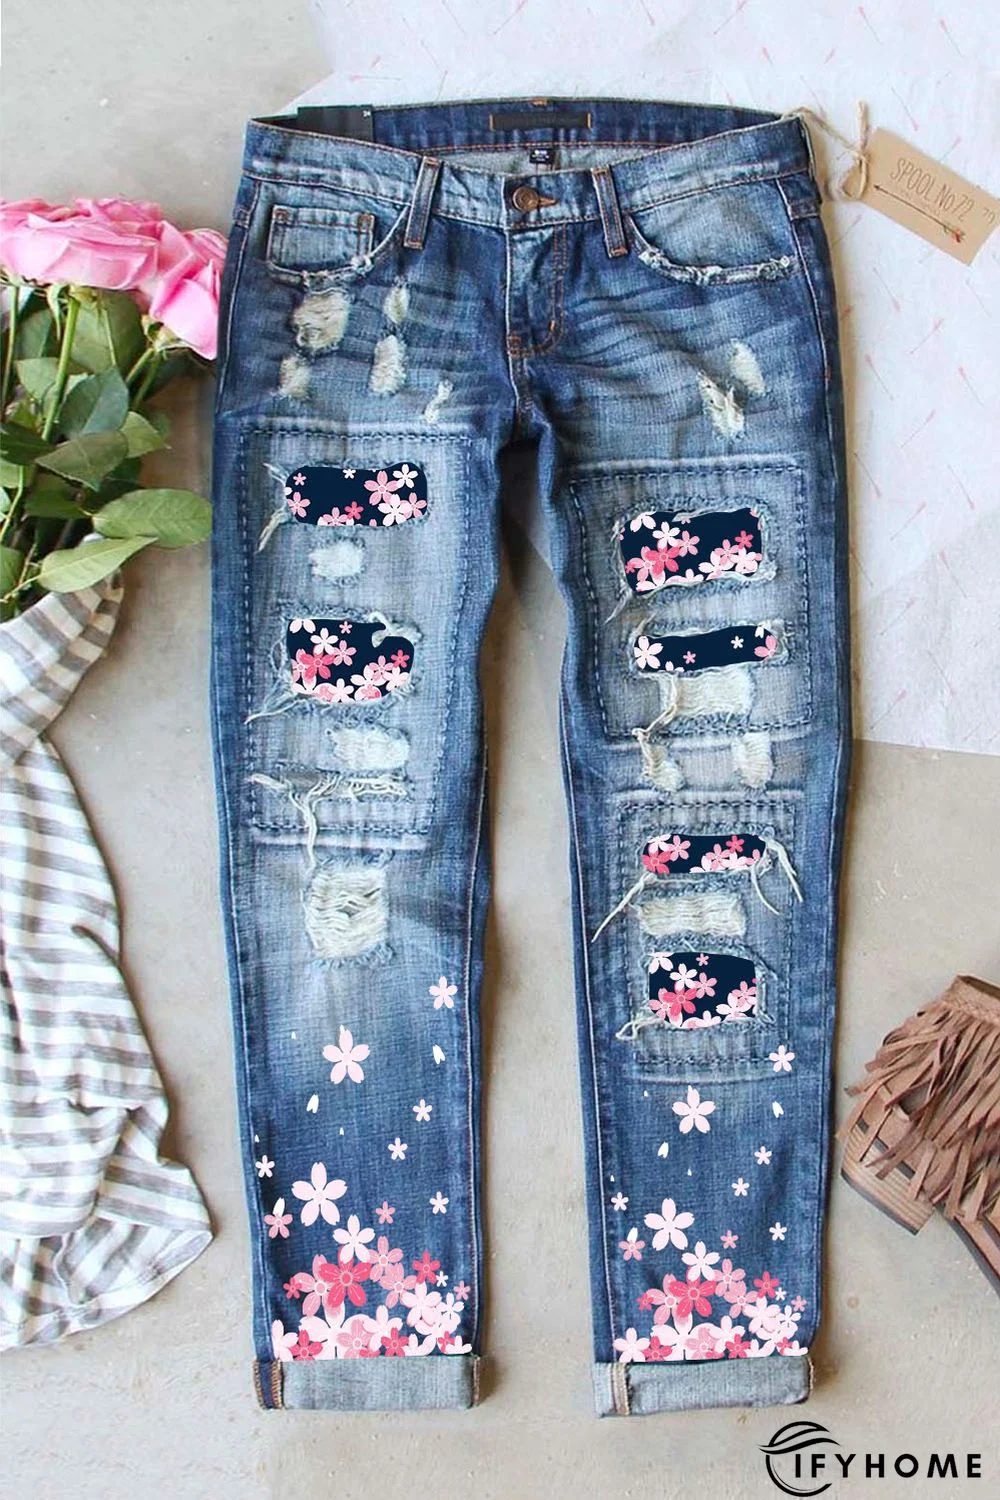 Sky Blue Cherry Blossom Pattern Splicing Mid Waist Distressed Jeans | IFYHOME